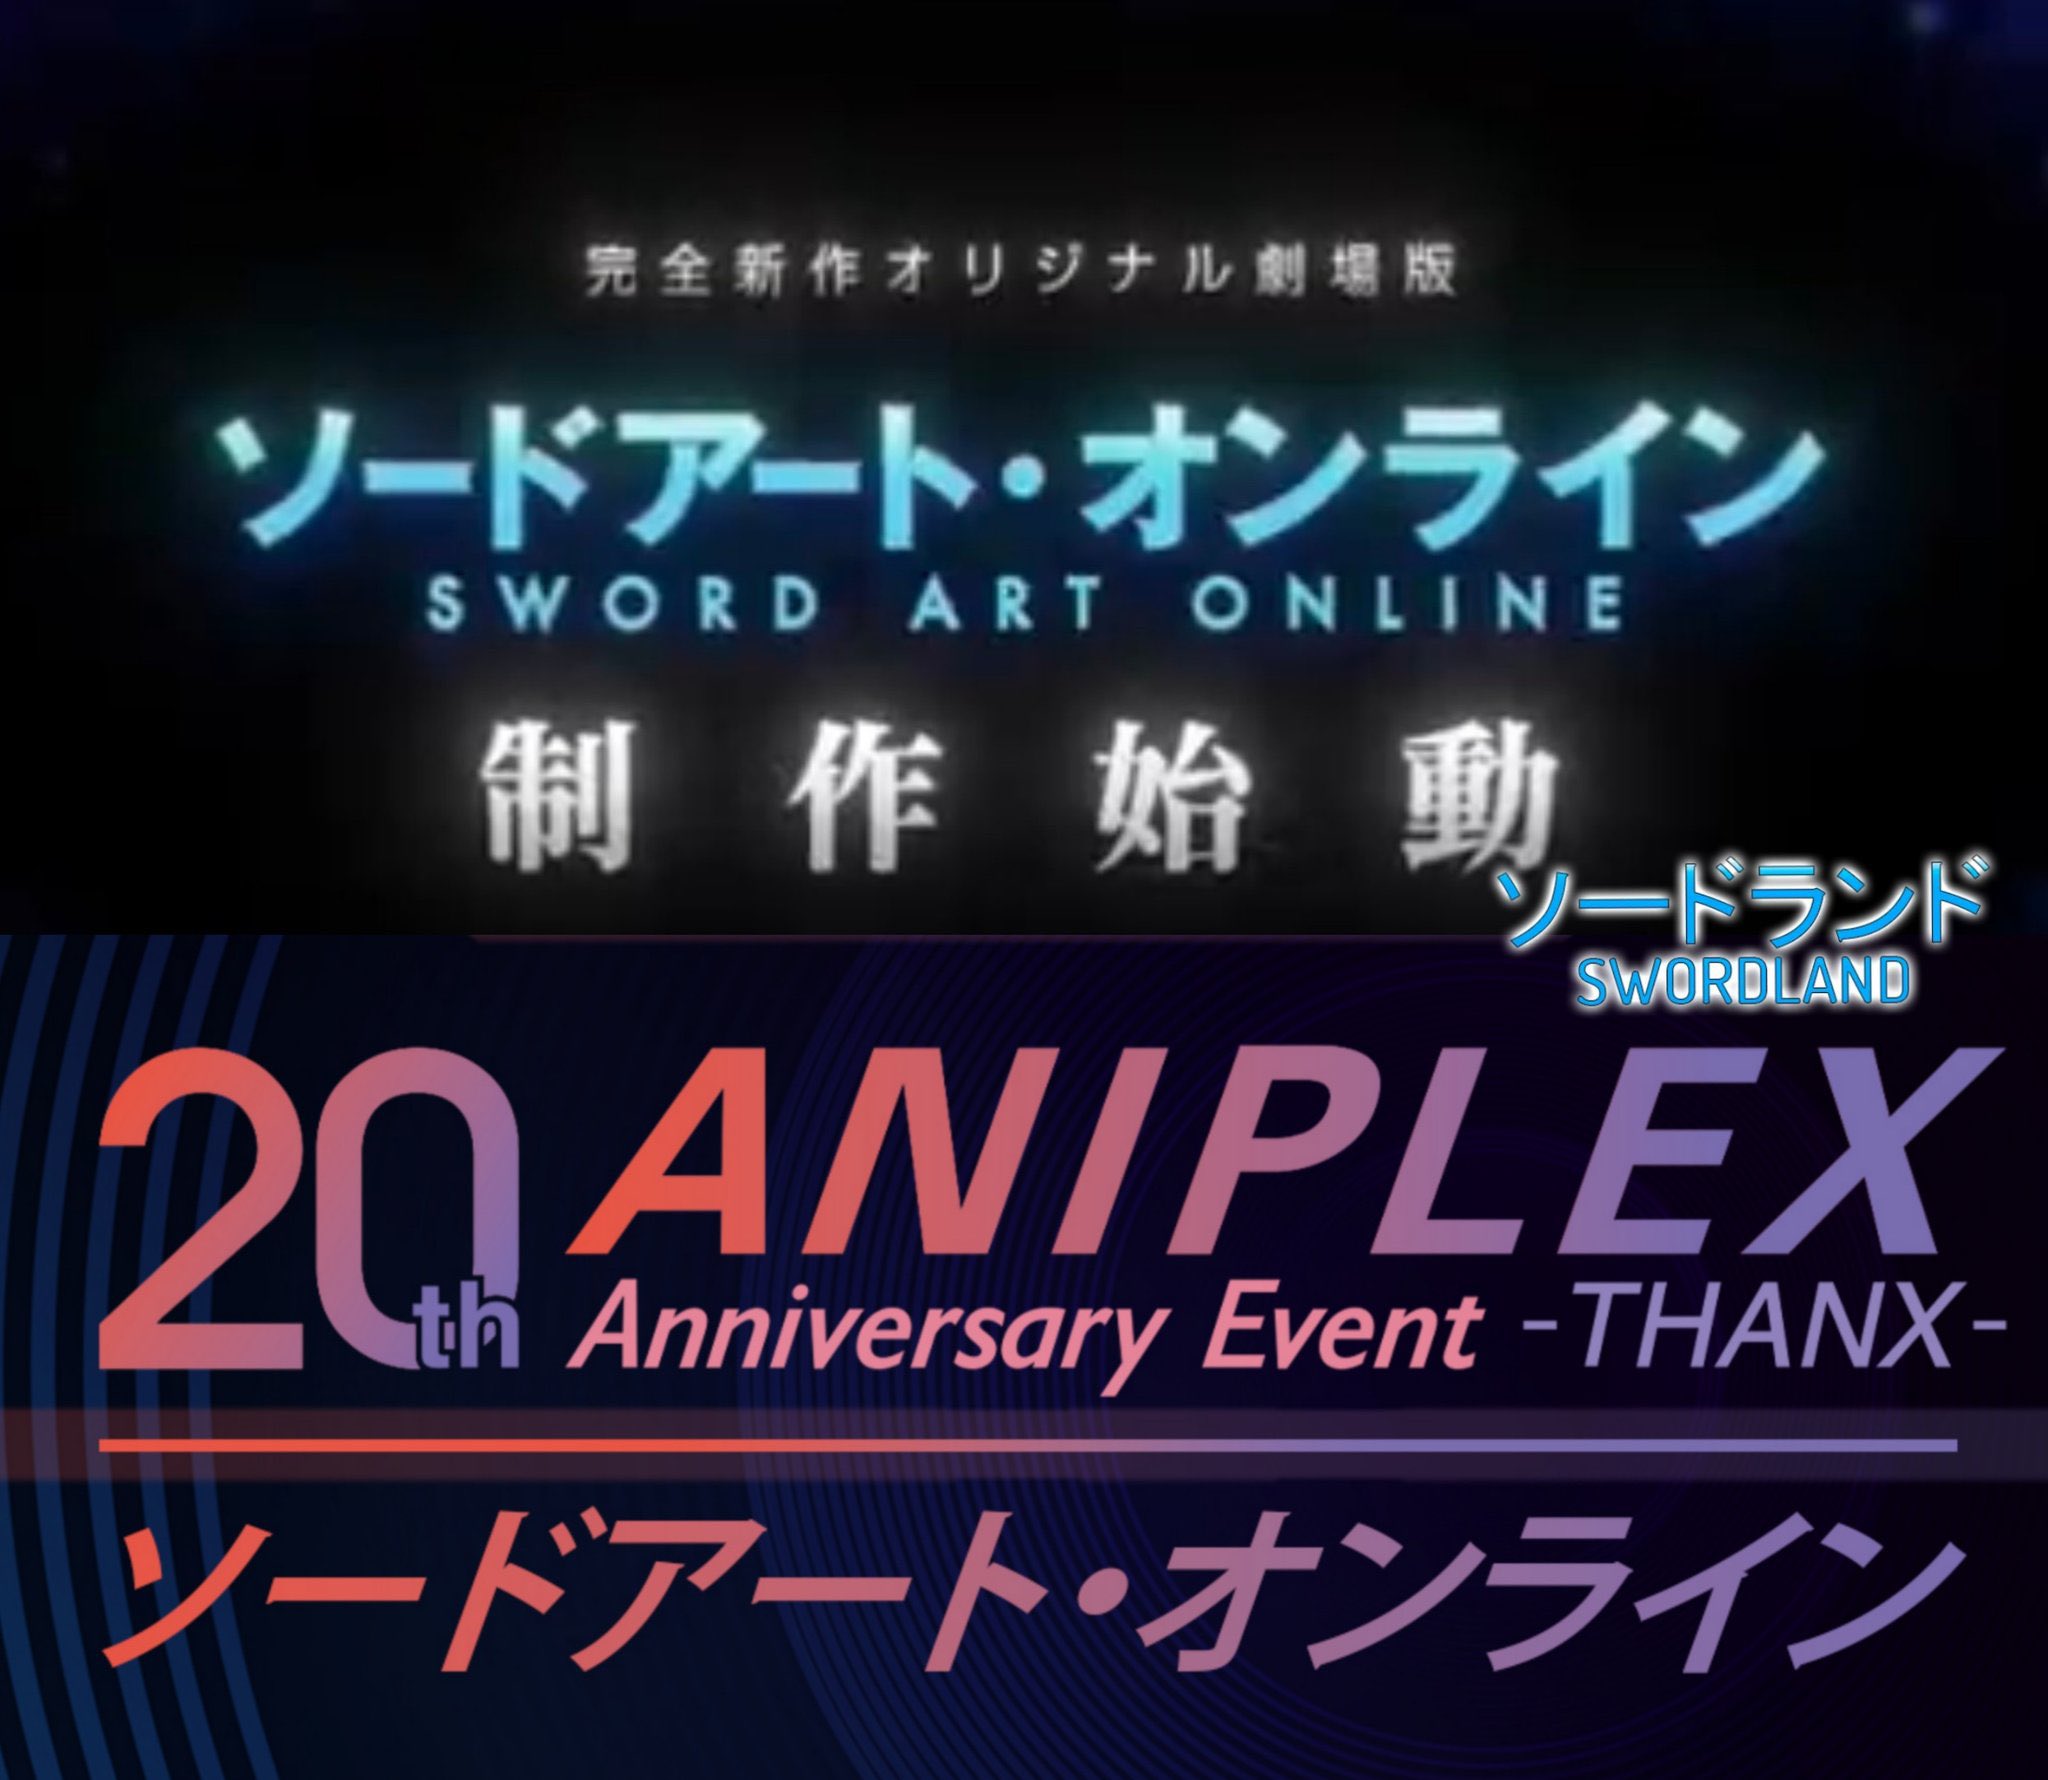 Sword Art Online Has a New Movie in Production